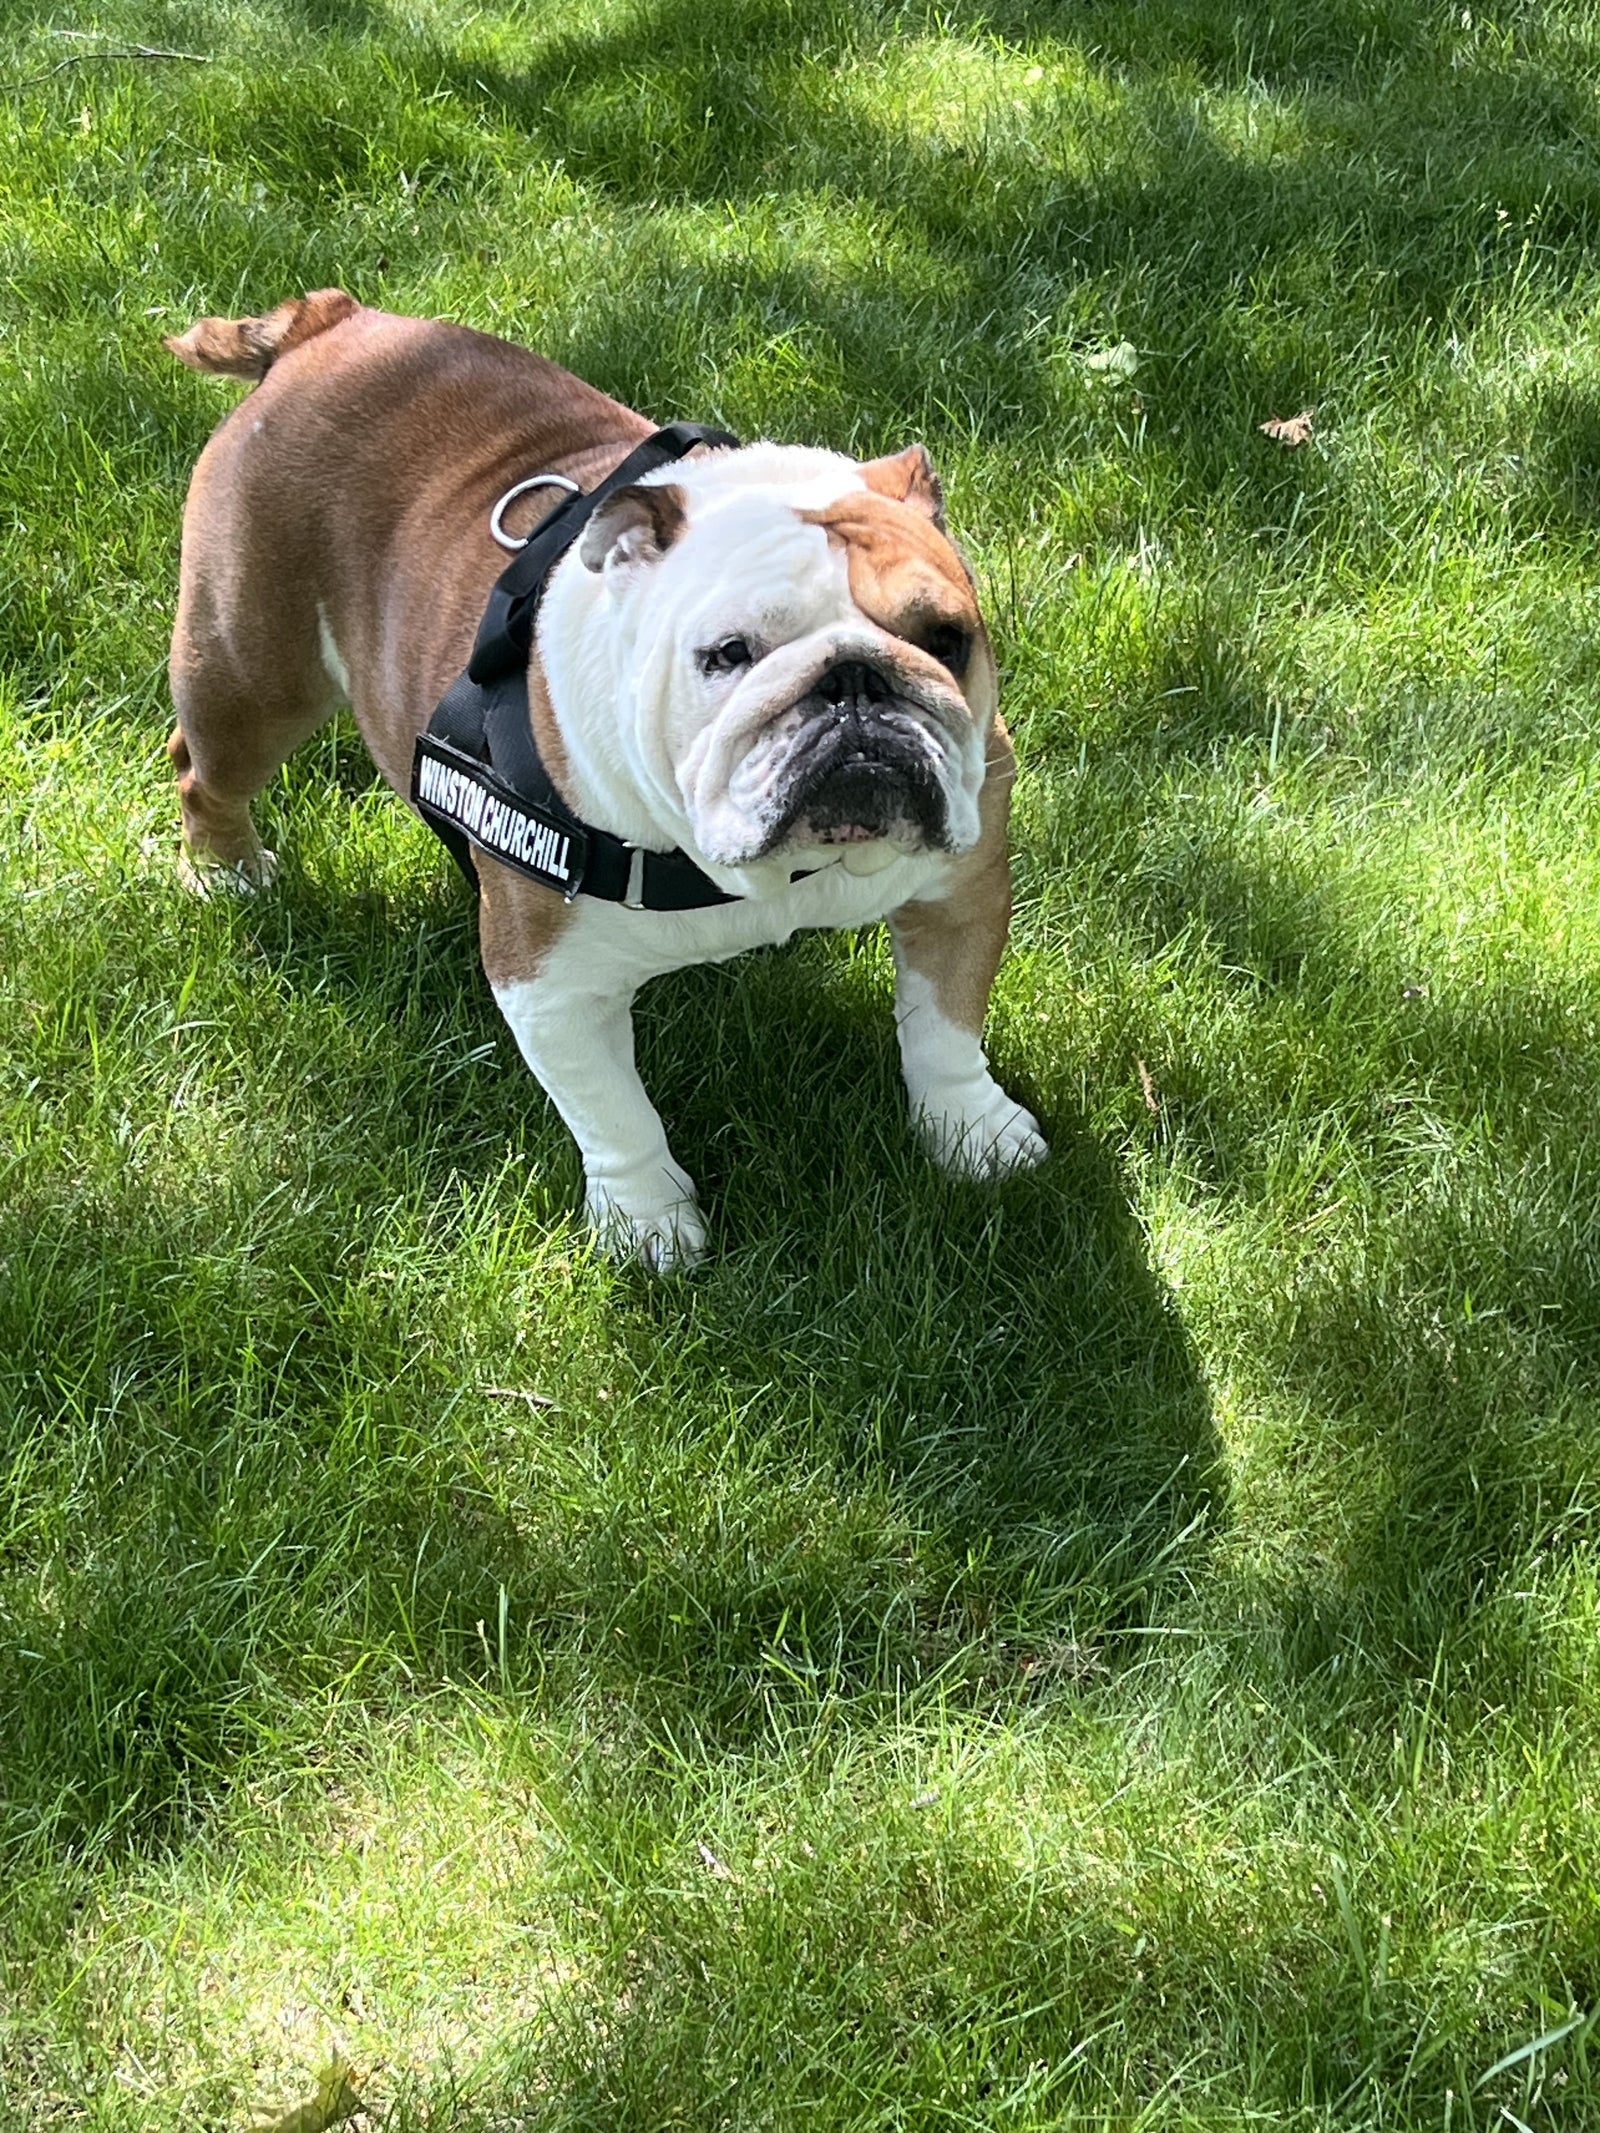 Summer Safety for Bulldogs: Tips to Keep Your Dog Cool and Comfortable